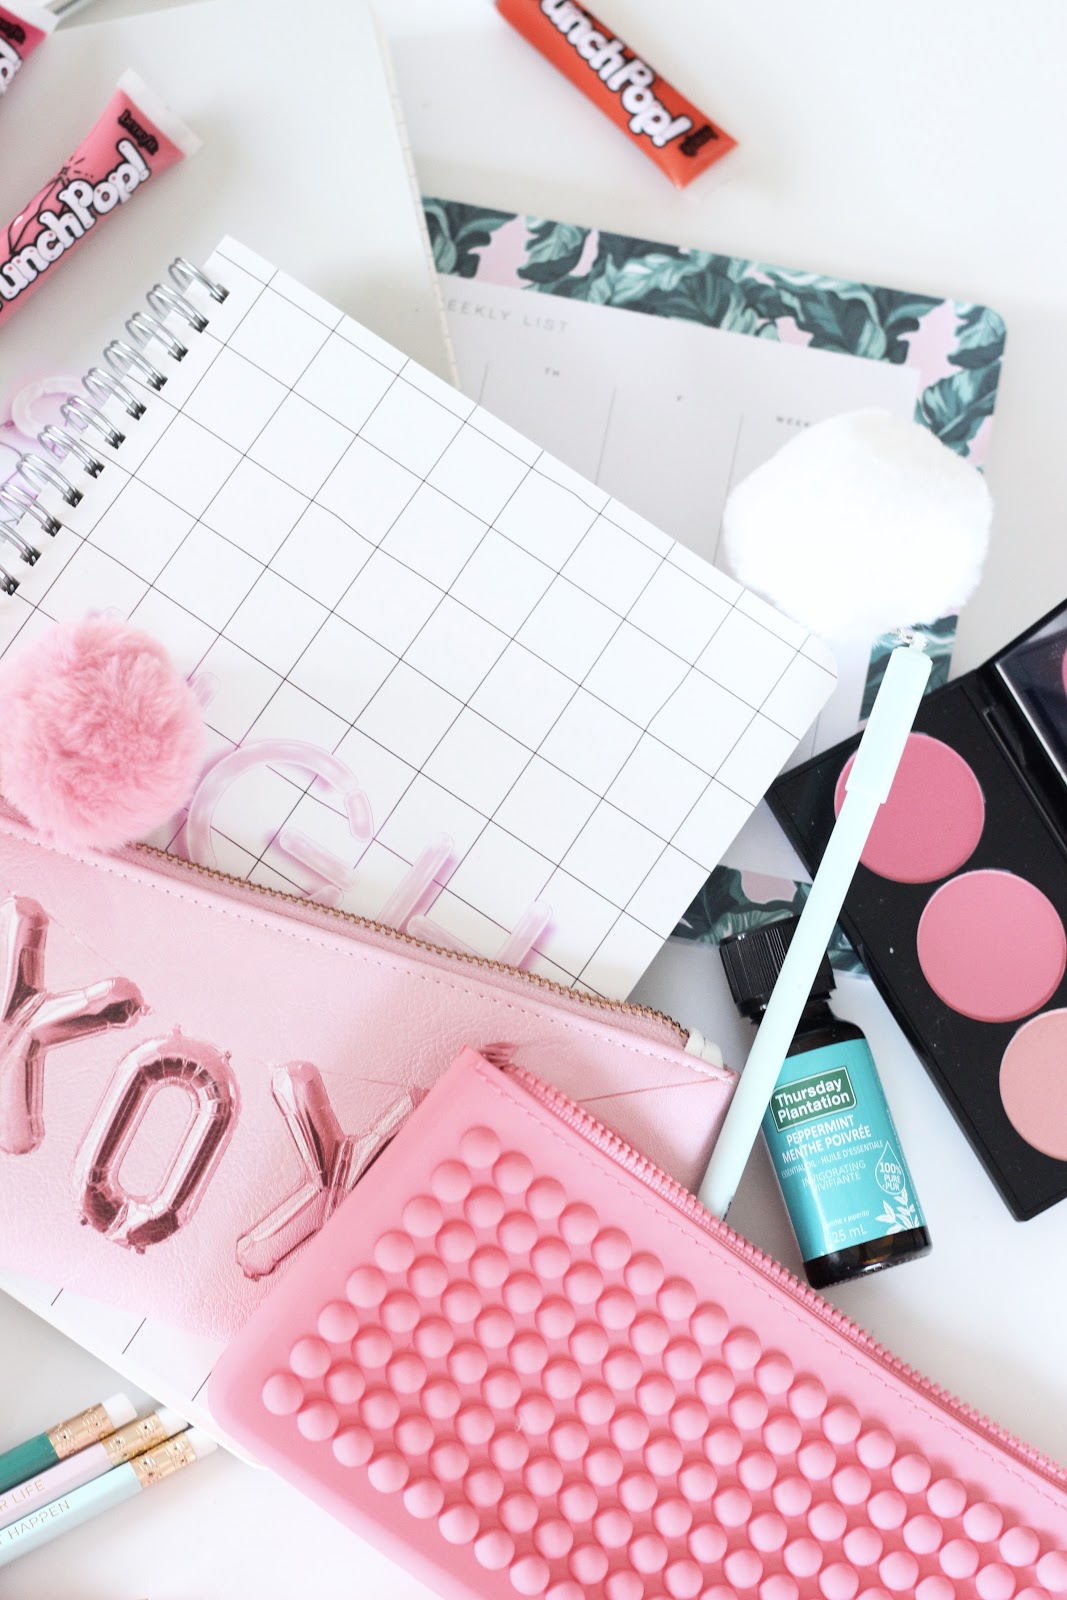 Back to school essentials- Thursday Plantation peppermint oil, Benefit Punch Pop, smashbox, Always X Always weekly note pad, Hobbry, Waterever Forever, Indigo, Saje, Bando 